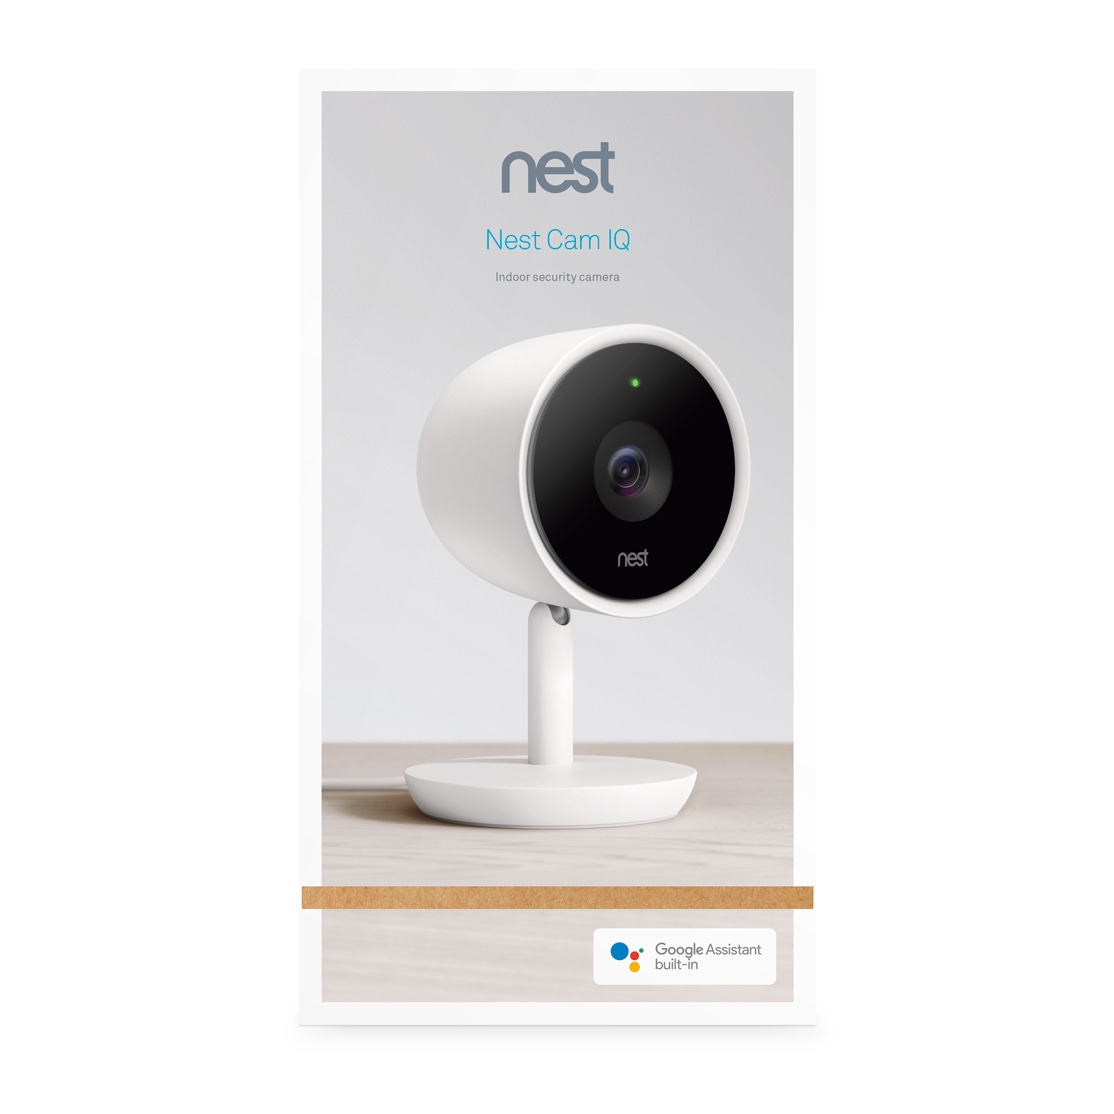 One of the best things about Nest products is that they continue to get better through over-the-air software updates. So we’re excited to give customers the ability to add the Google Assistant to Nest Cam IQ indoor, more intelligent activity zones to Nest Aware, and more flexibility with a 5-day Nest Aware subscription plan.